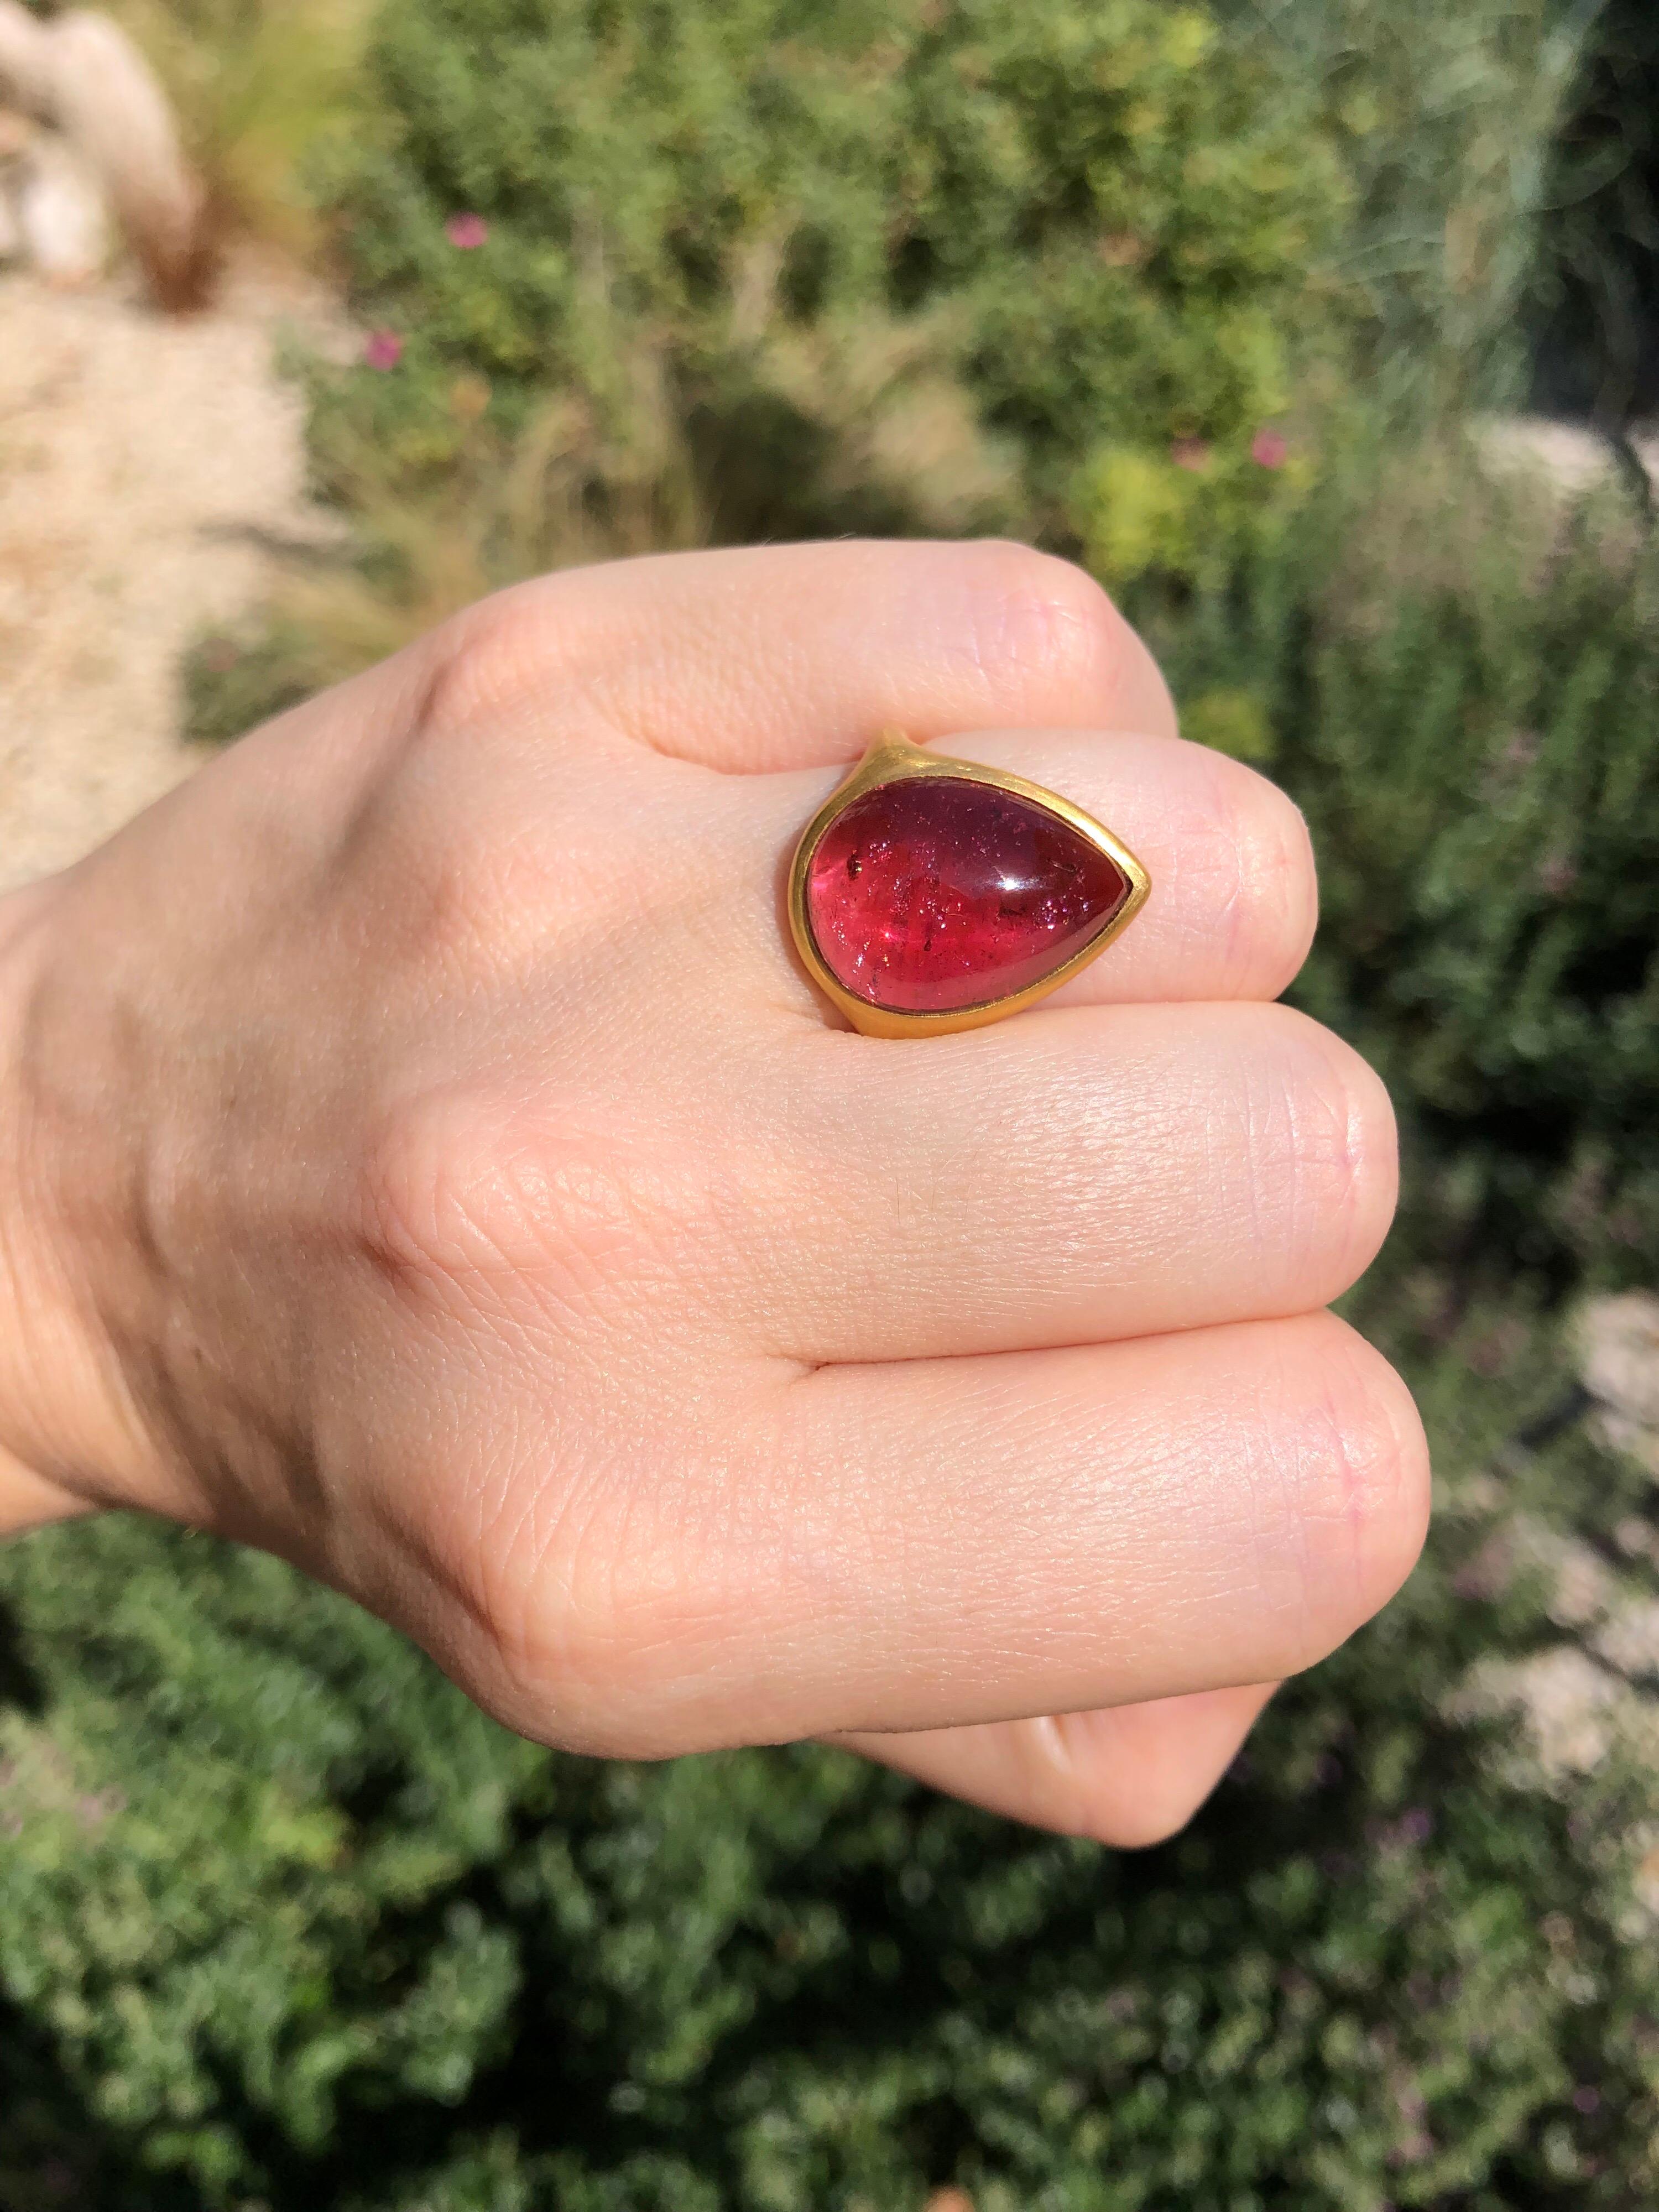 This modern ring by Scrives is composed of a large Pink/red tourmaline cabochon of 13.11cts set in 22kt gold. The tourmaline has very interesting natural inclusions some with darker red colour and others with shinny & rainbow effects which